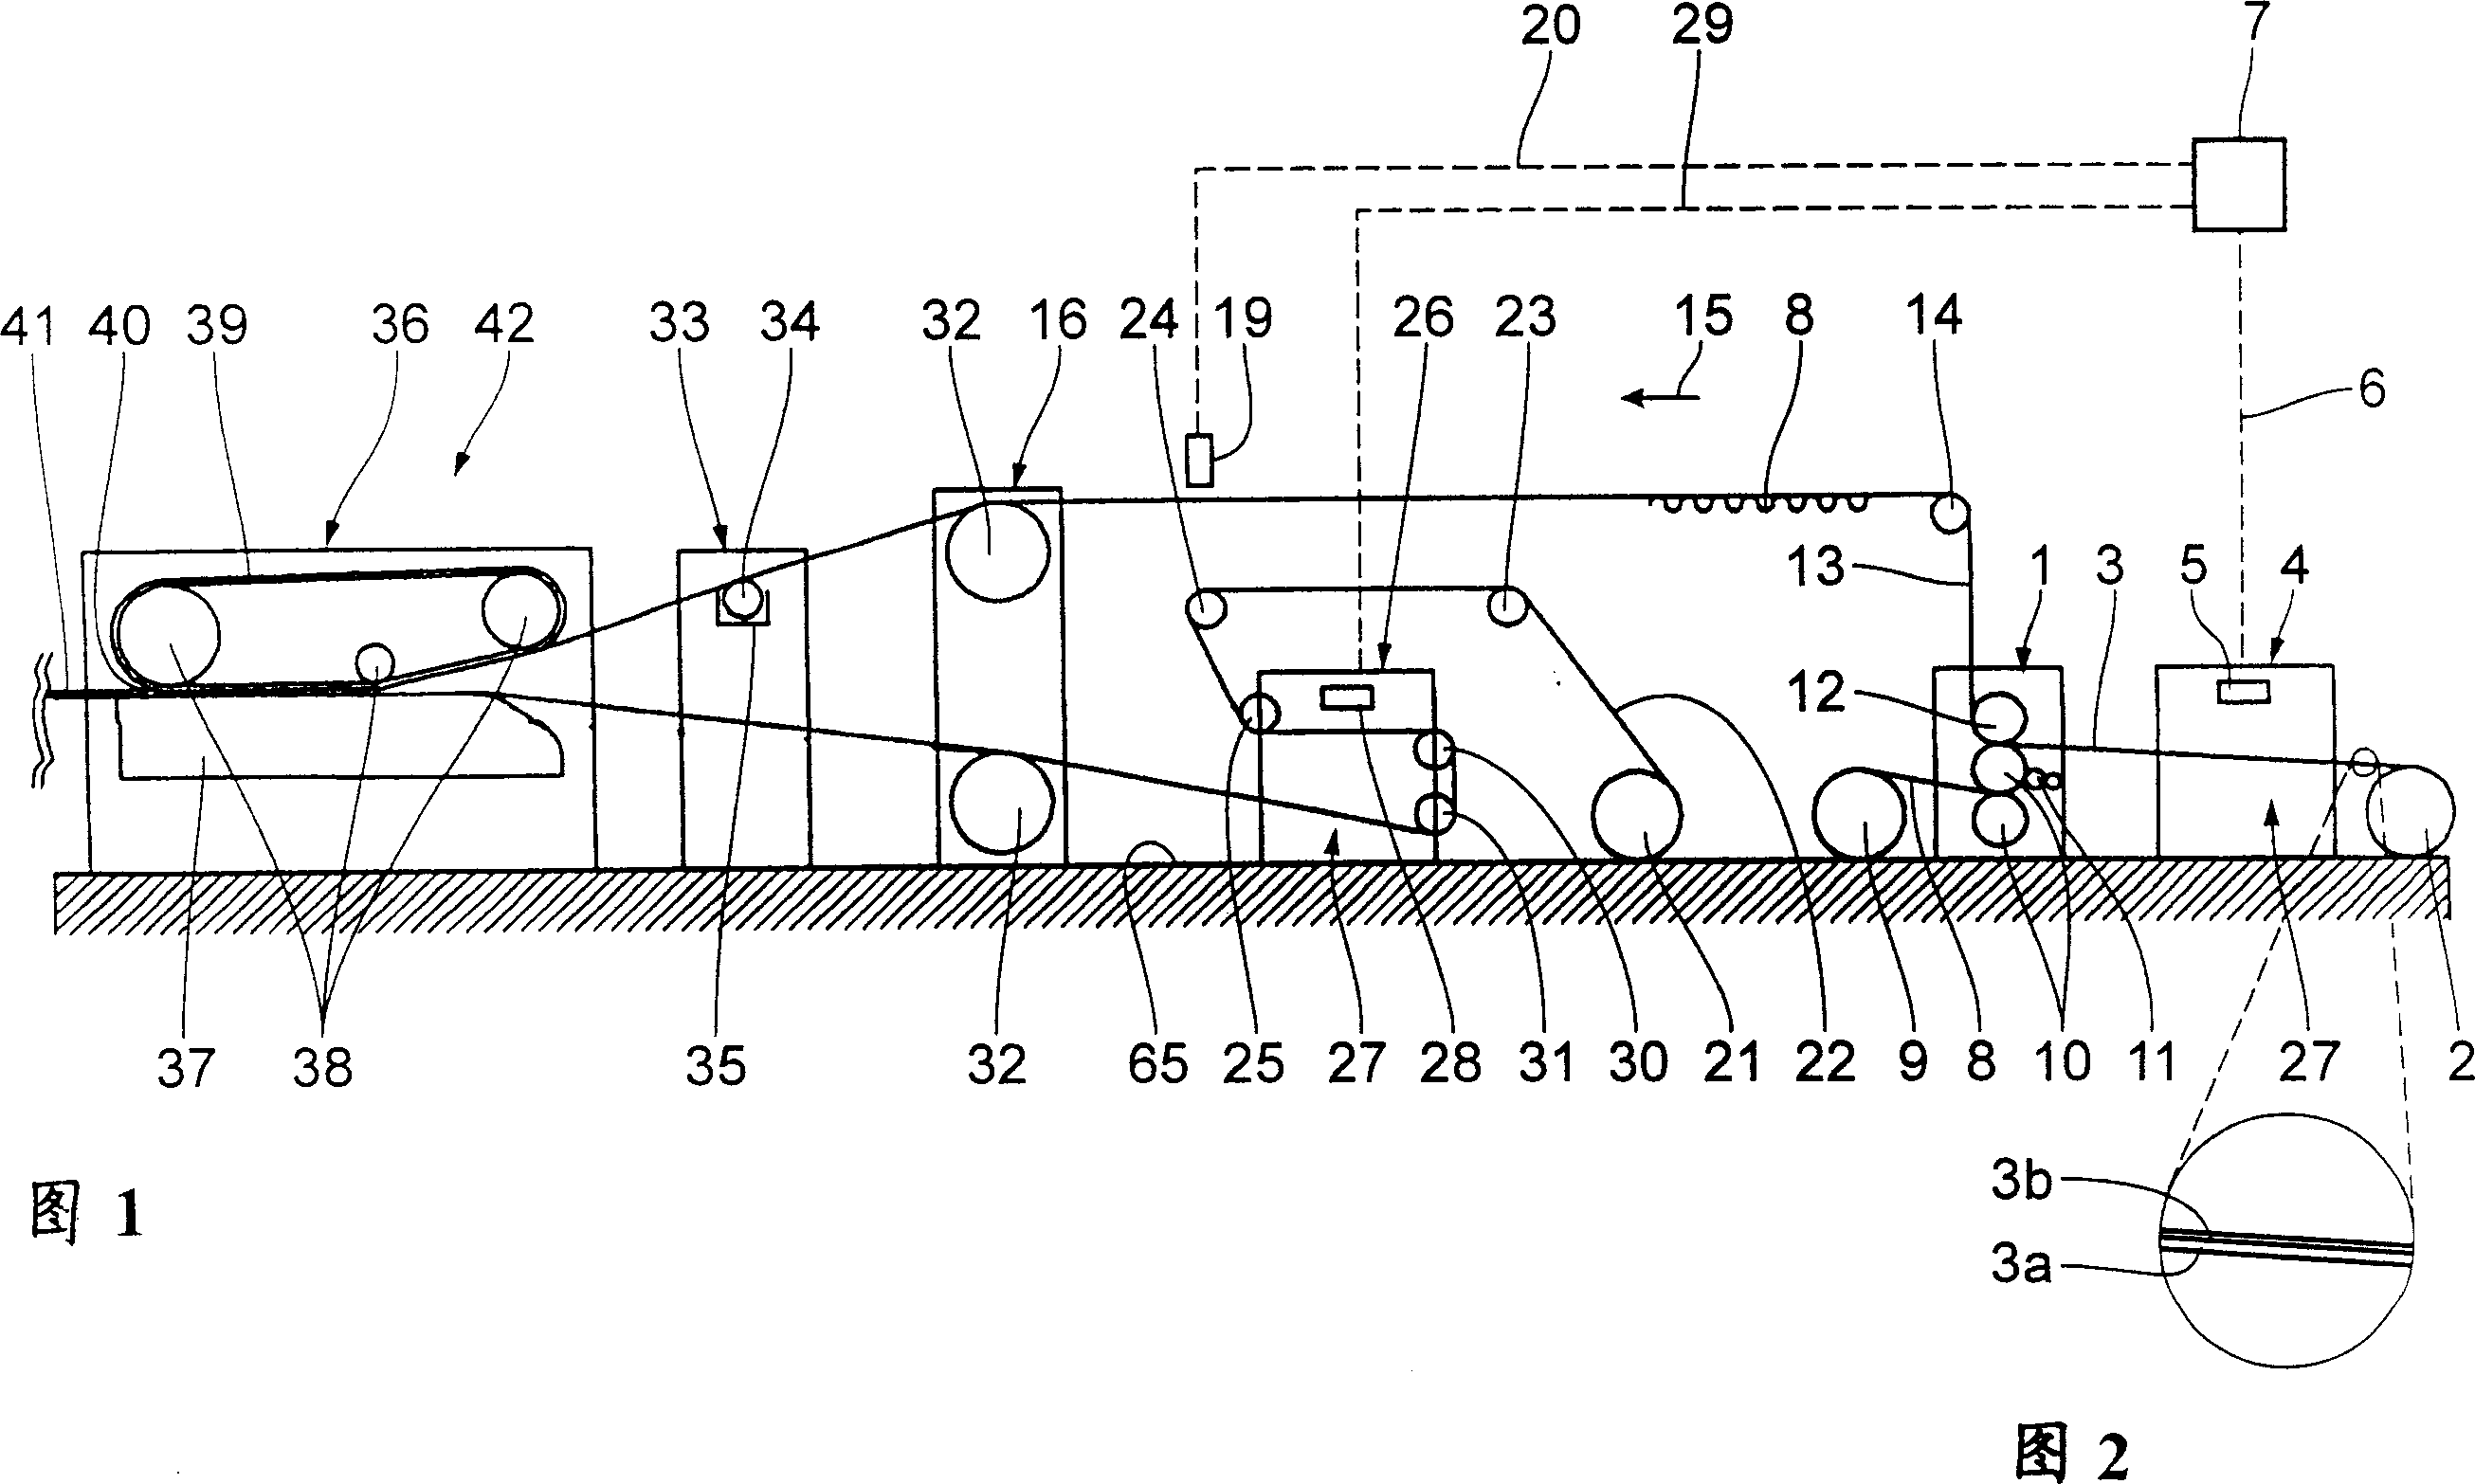 Corrughted paper board processing machine and method for producing corrugated paper board